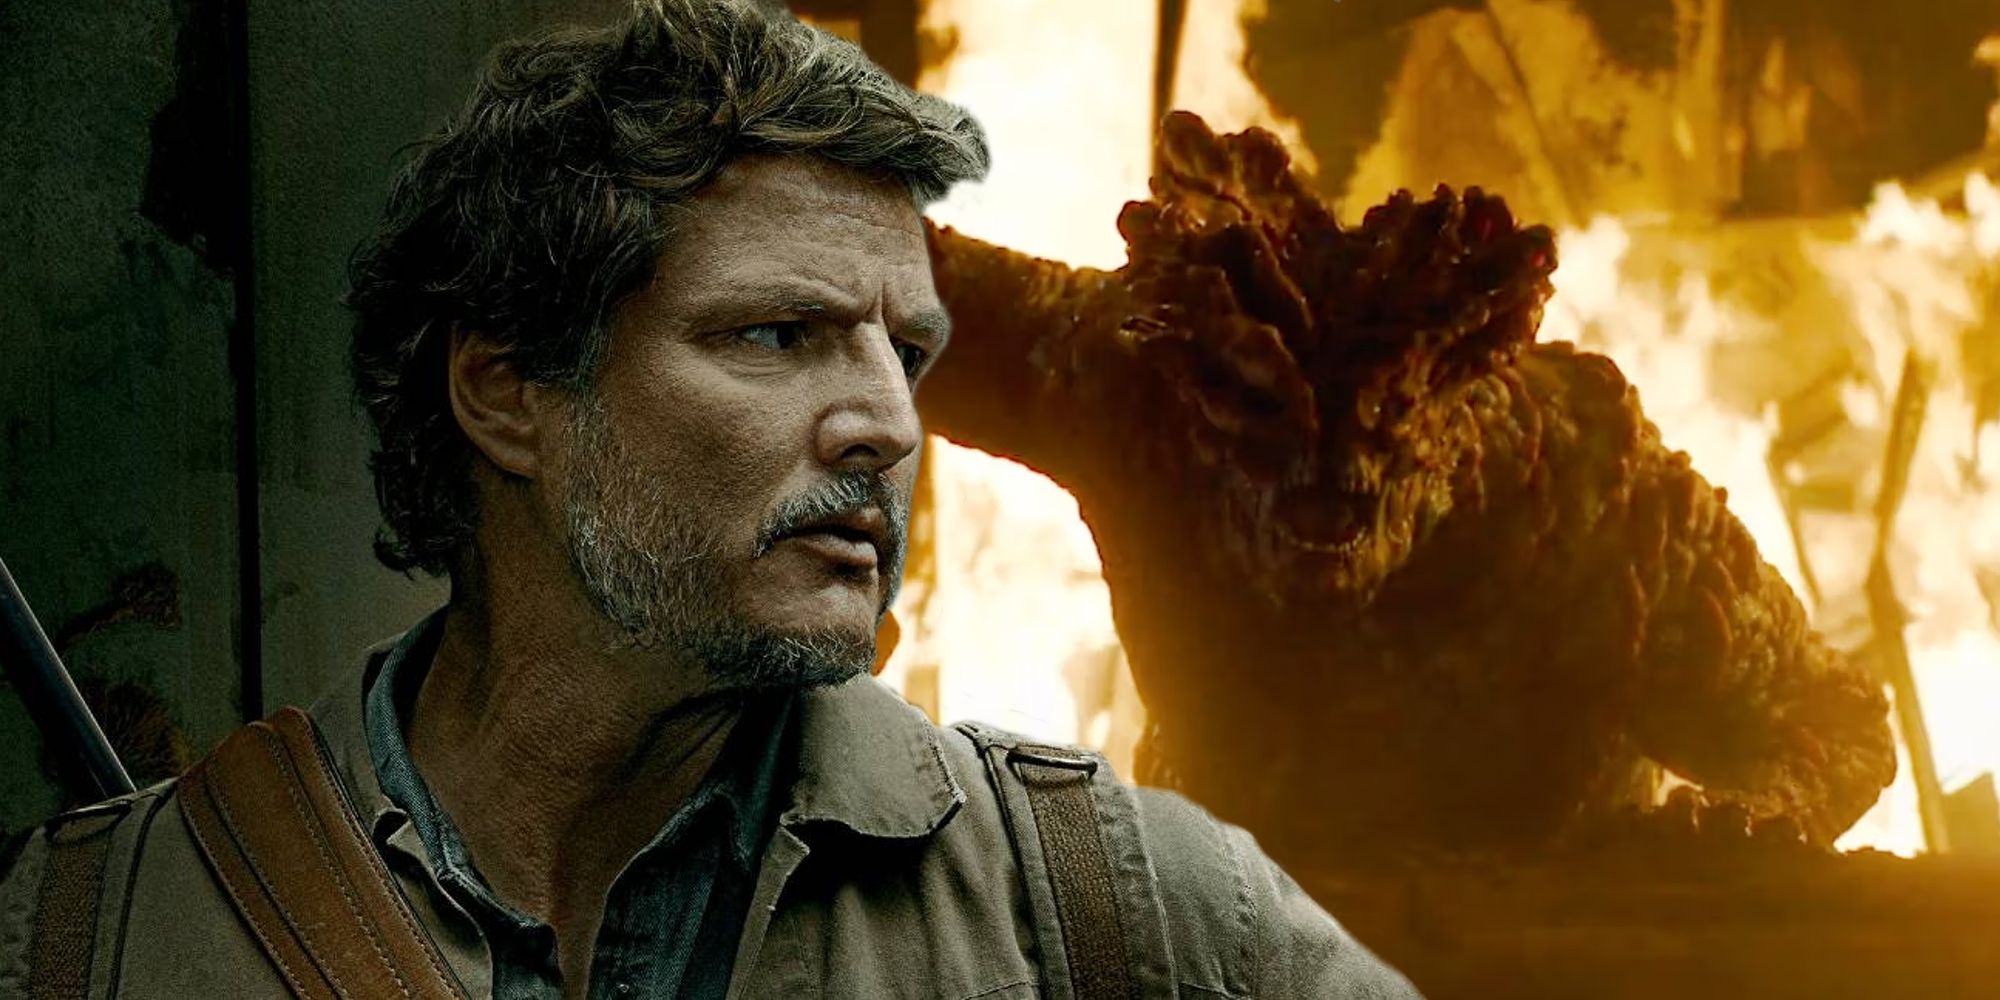 Pedro Pascal as Joel in official HBO character poster and the Bloater surrounded by flames from the Last of Us' trailer